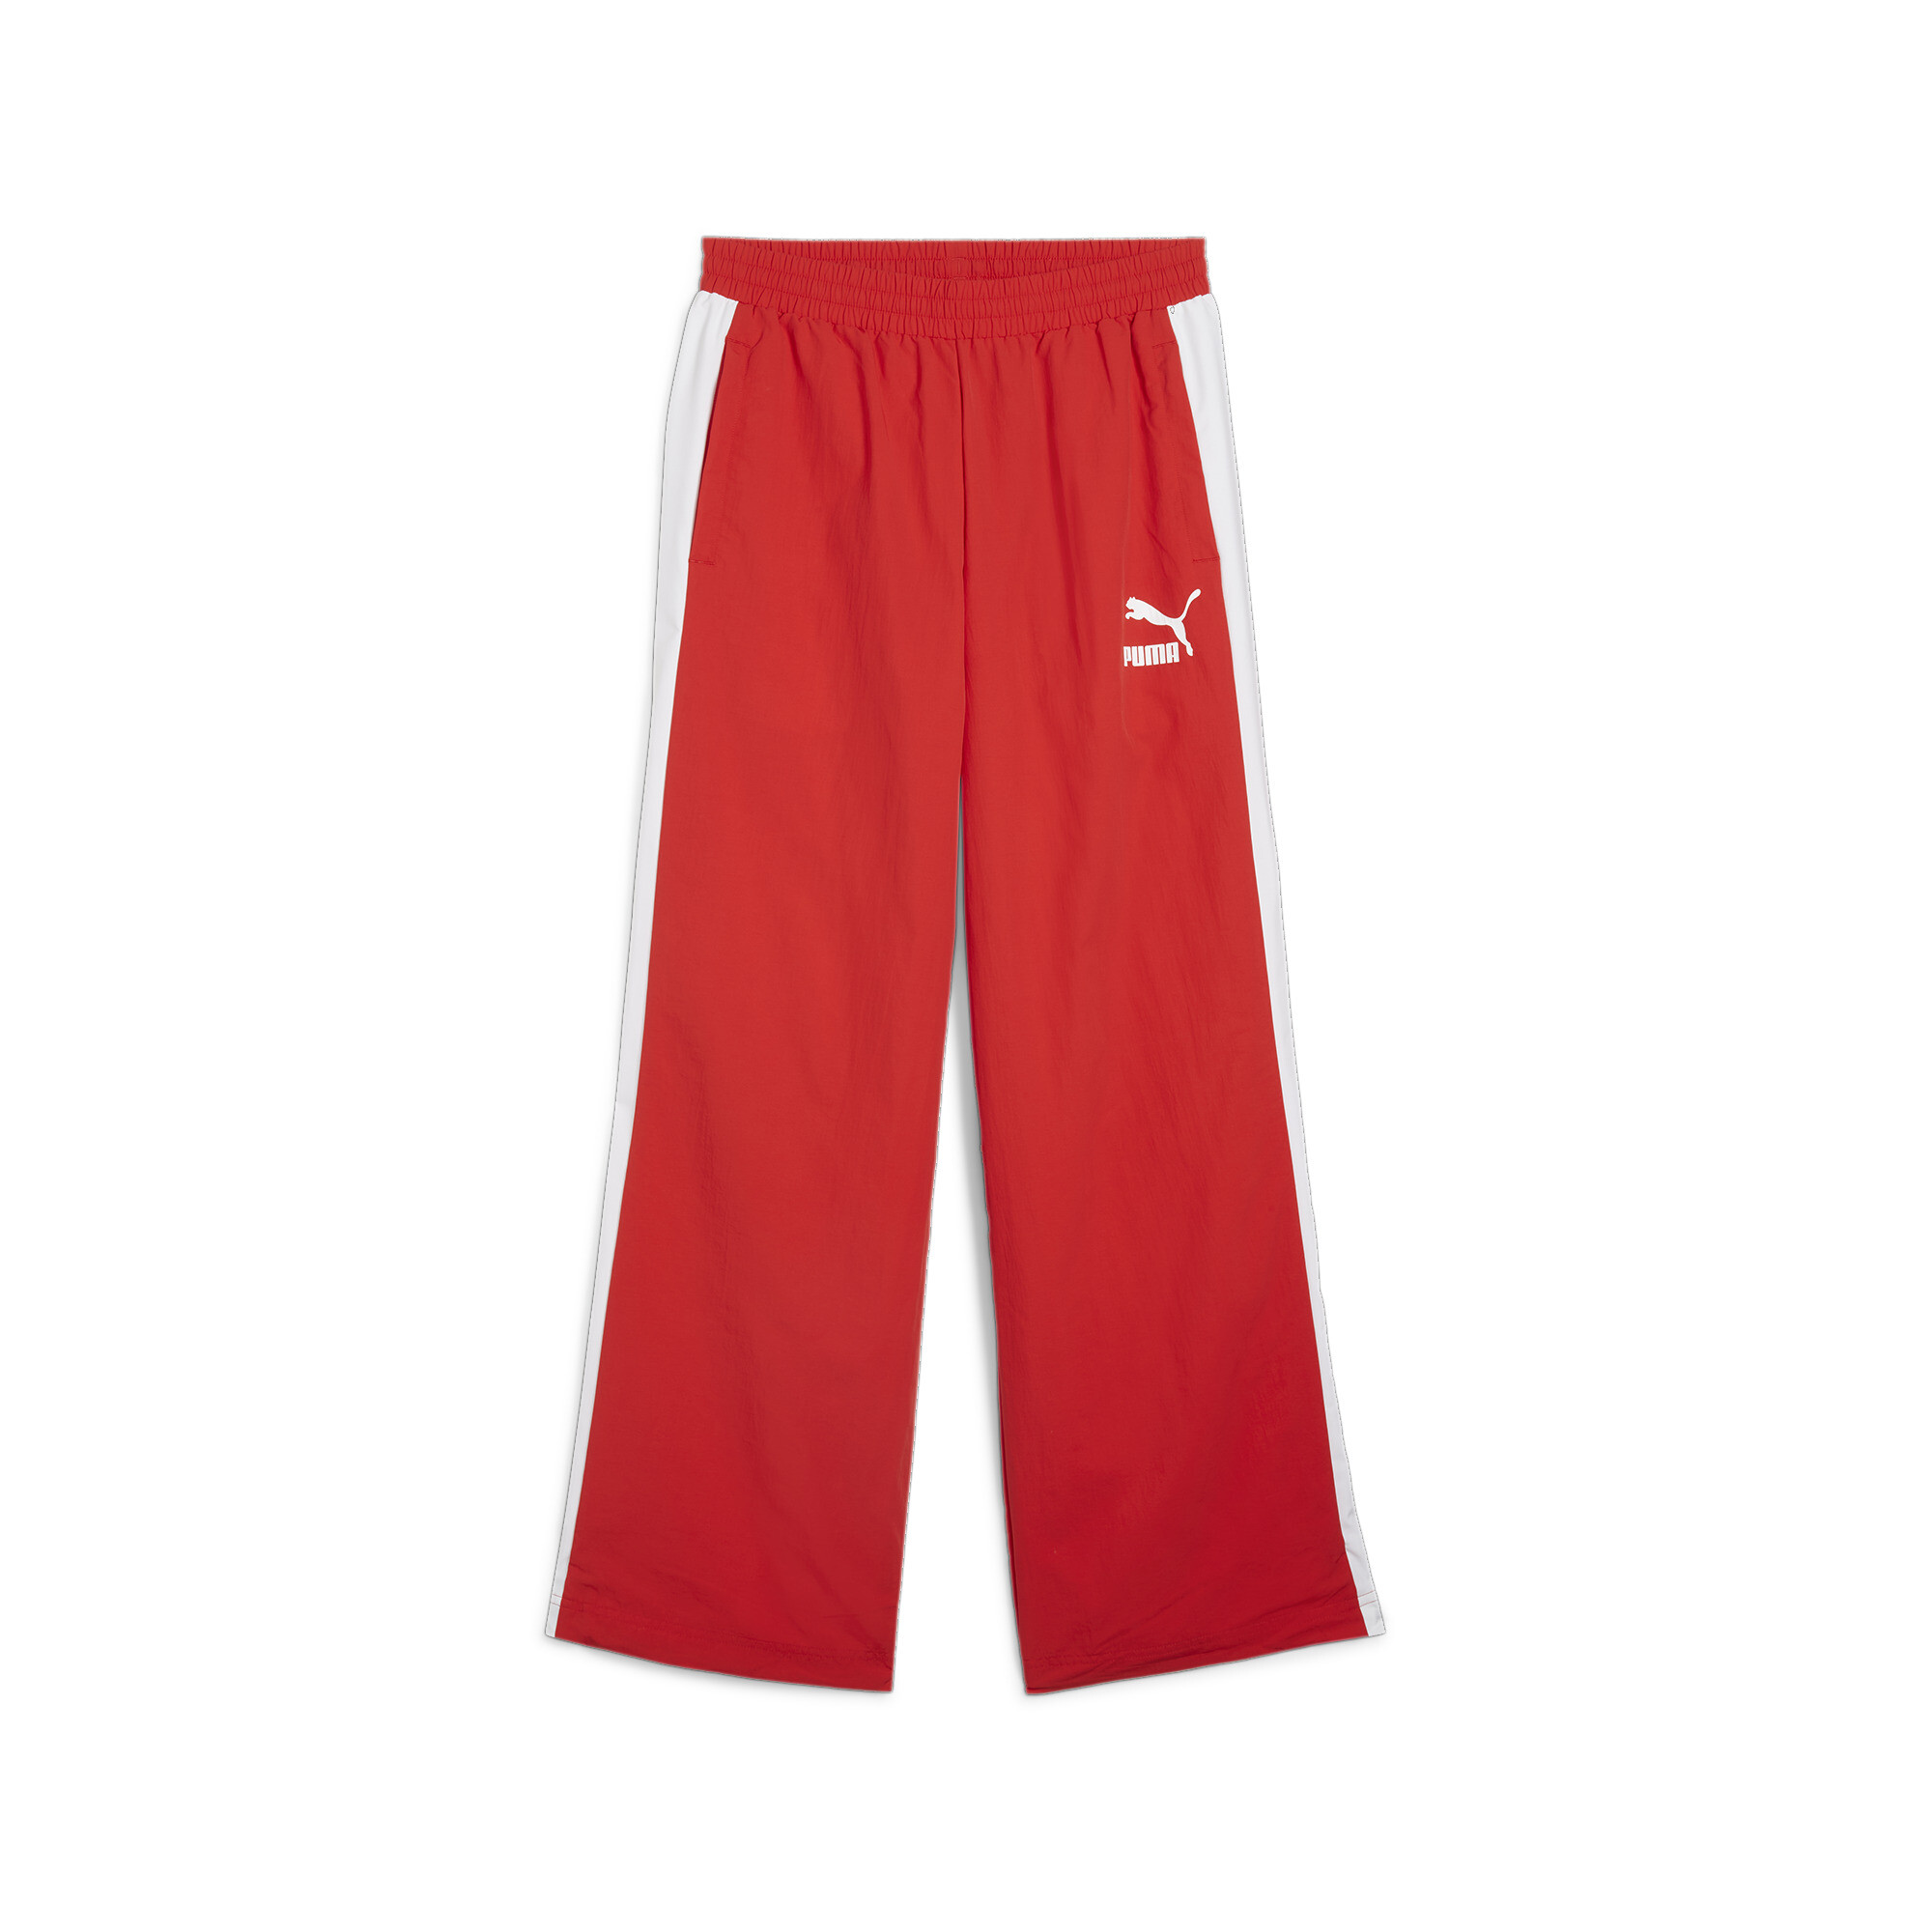 Puma T7's Oversized Track Pants, Red, Size S, Women